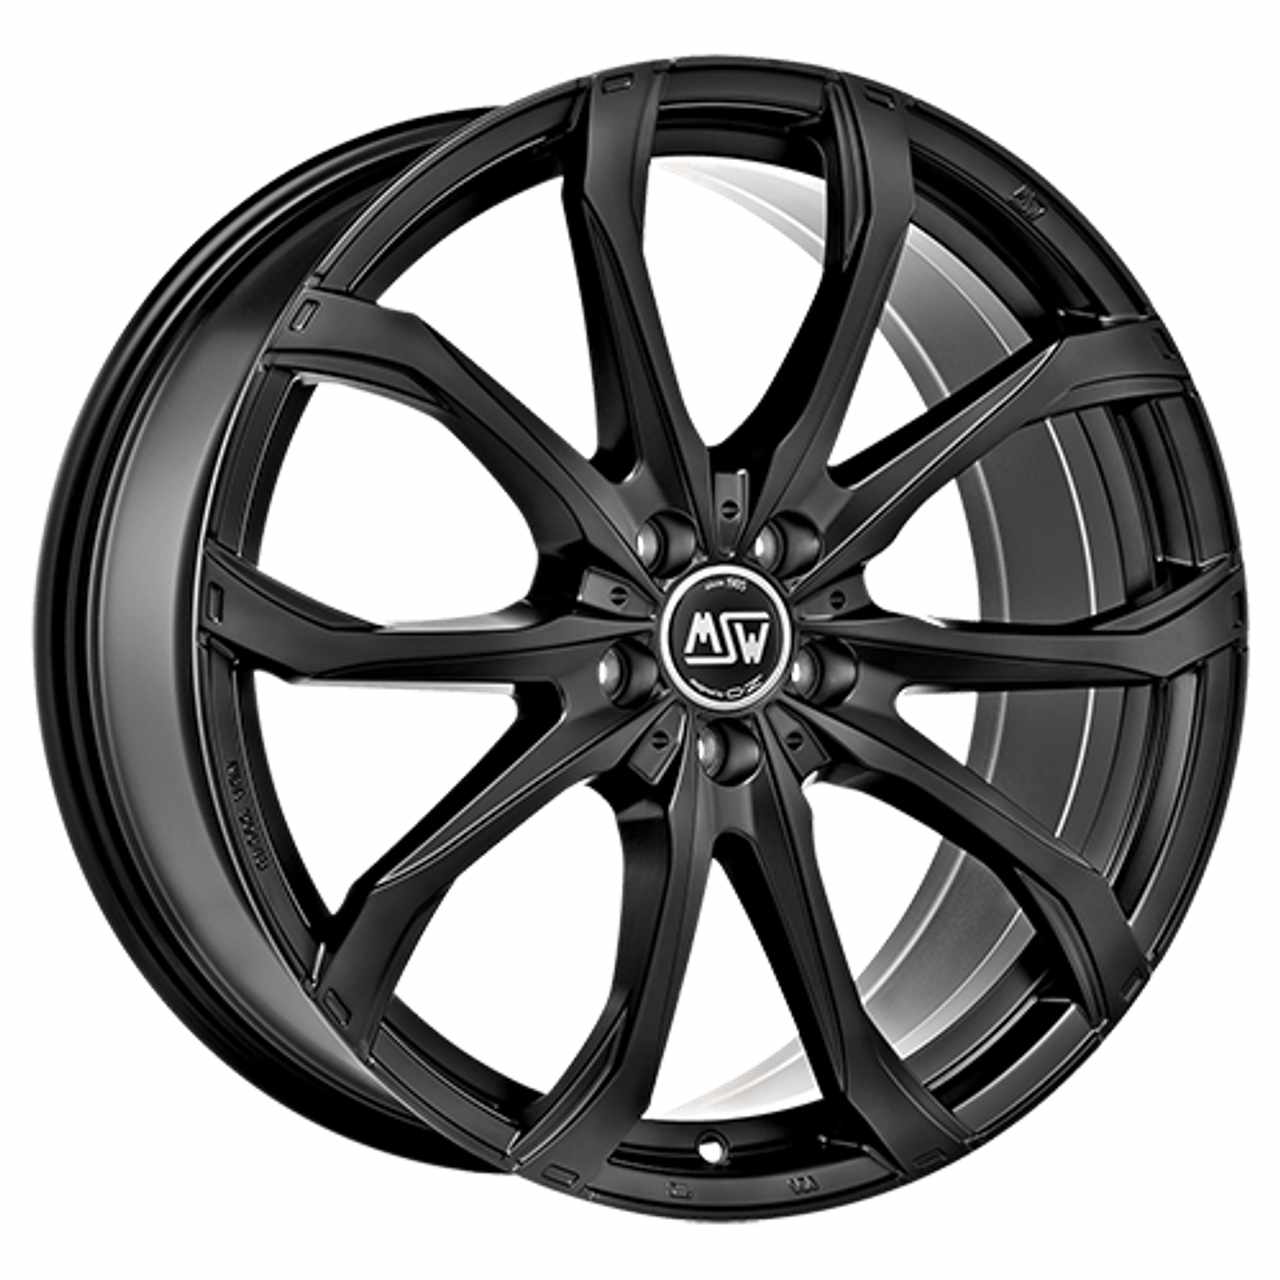 MSW (OZ) MSW 48 gloss black full polished 10.0Jx21 5x112 ET27